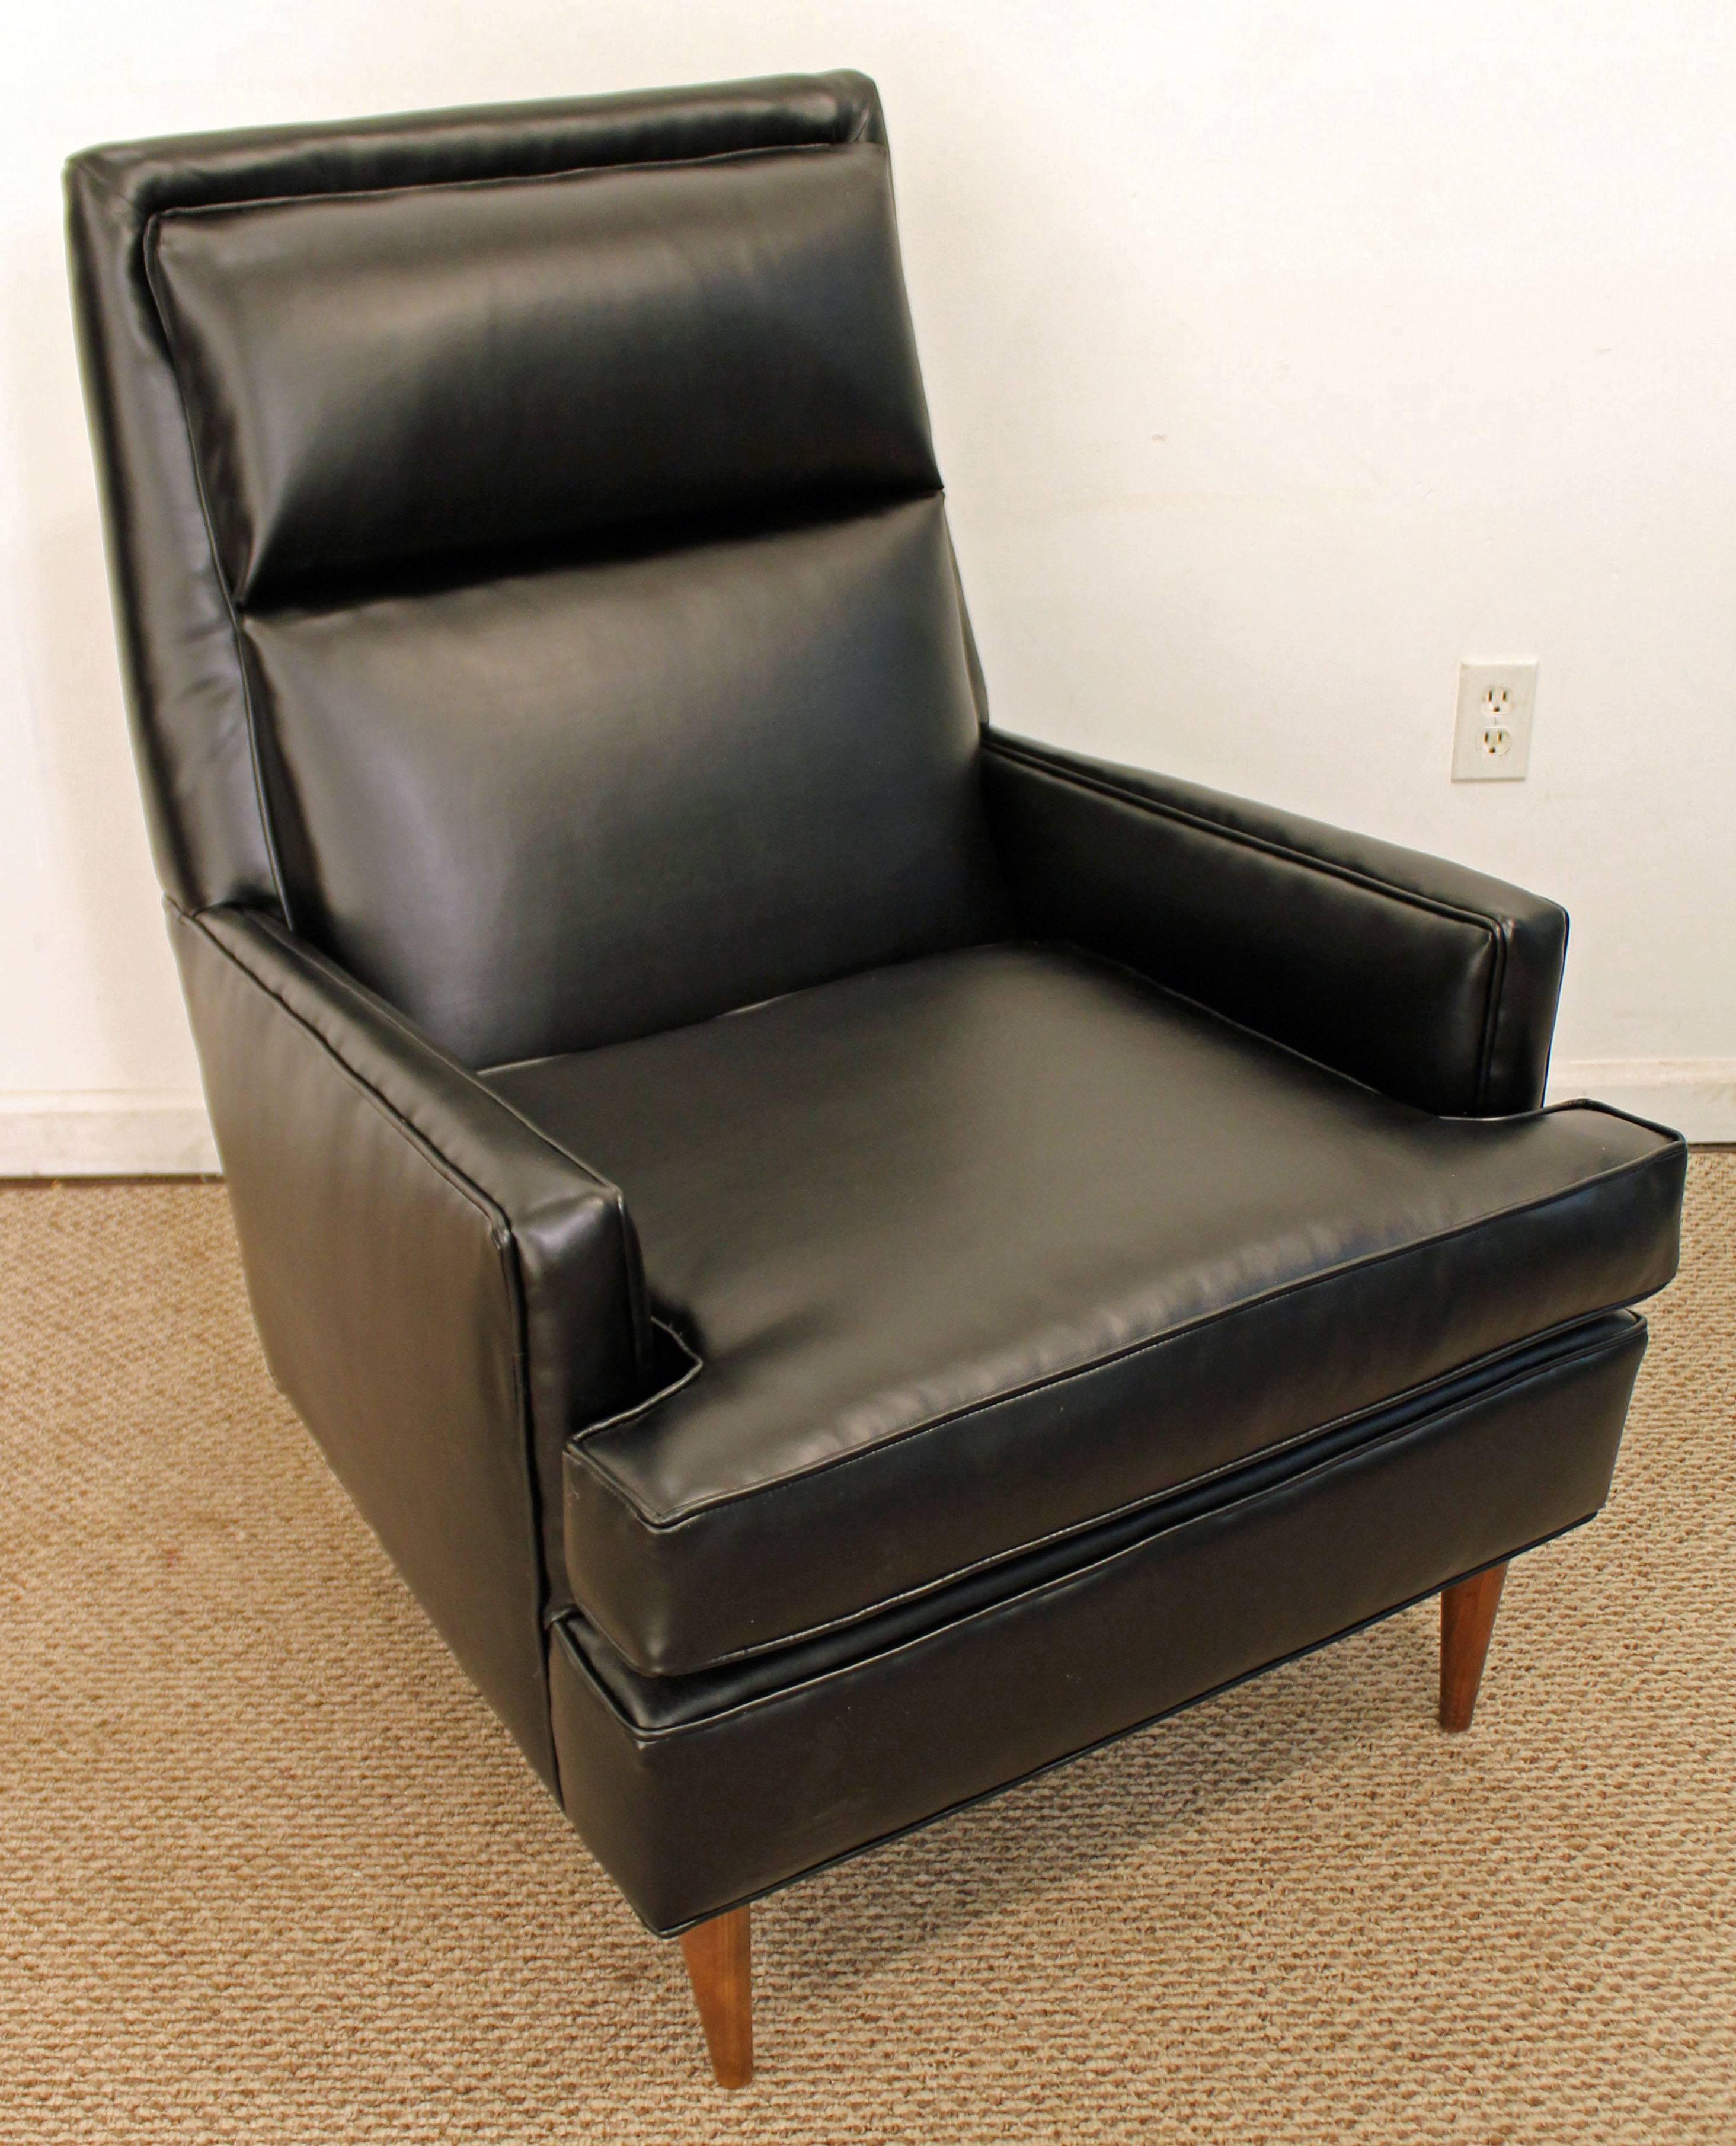 This chair has been completely reupholstered with bonded synthetic leather. 

Approximate dimensions:
28.25